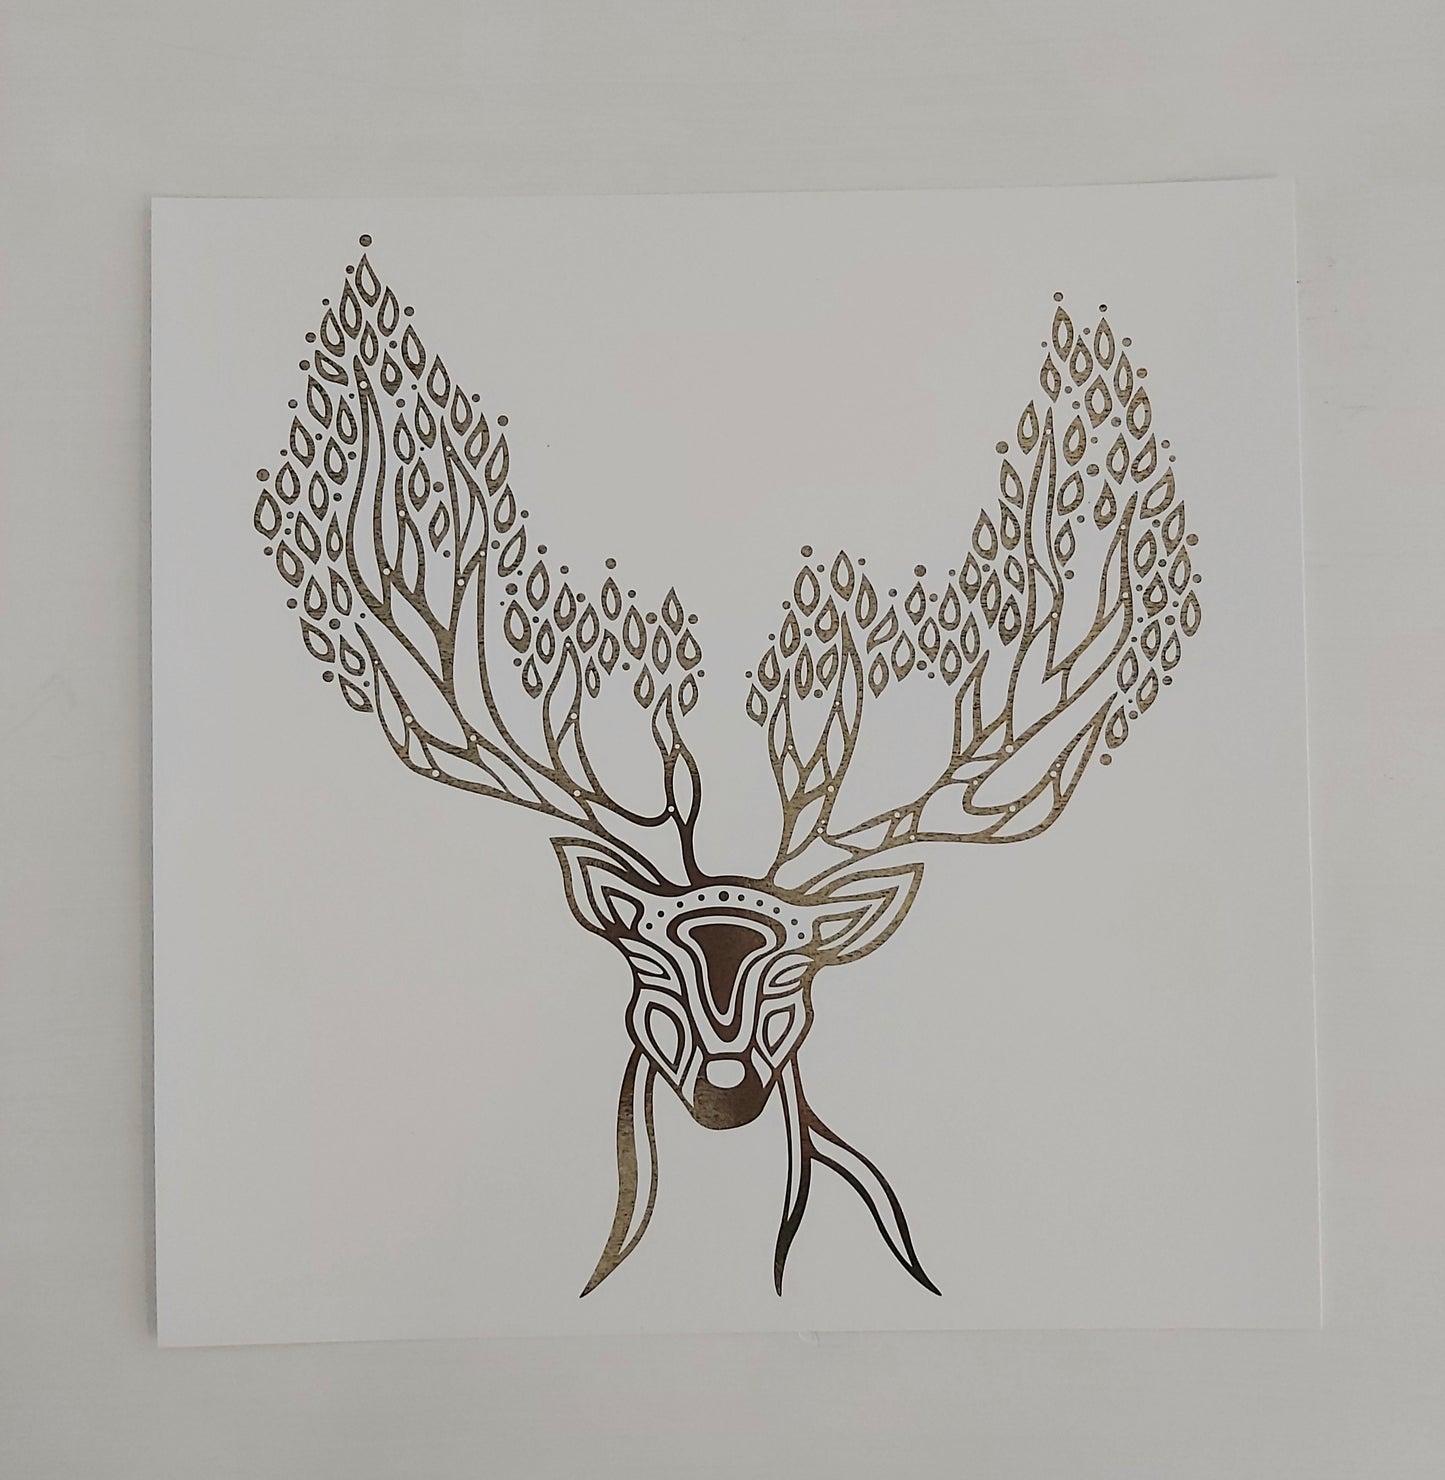 Print of Patrick Hunter's painting of a deer spirit in gold leaf on white in woodland art style.